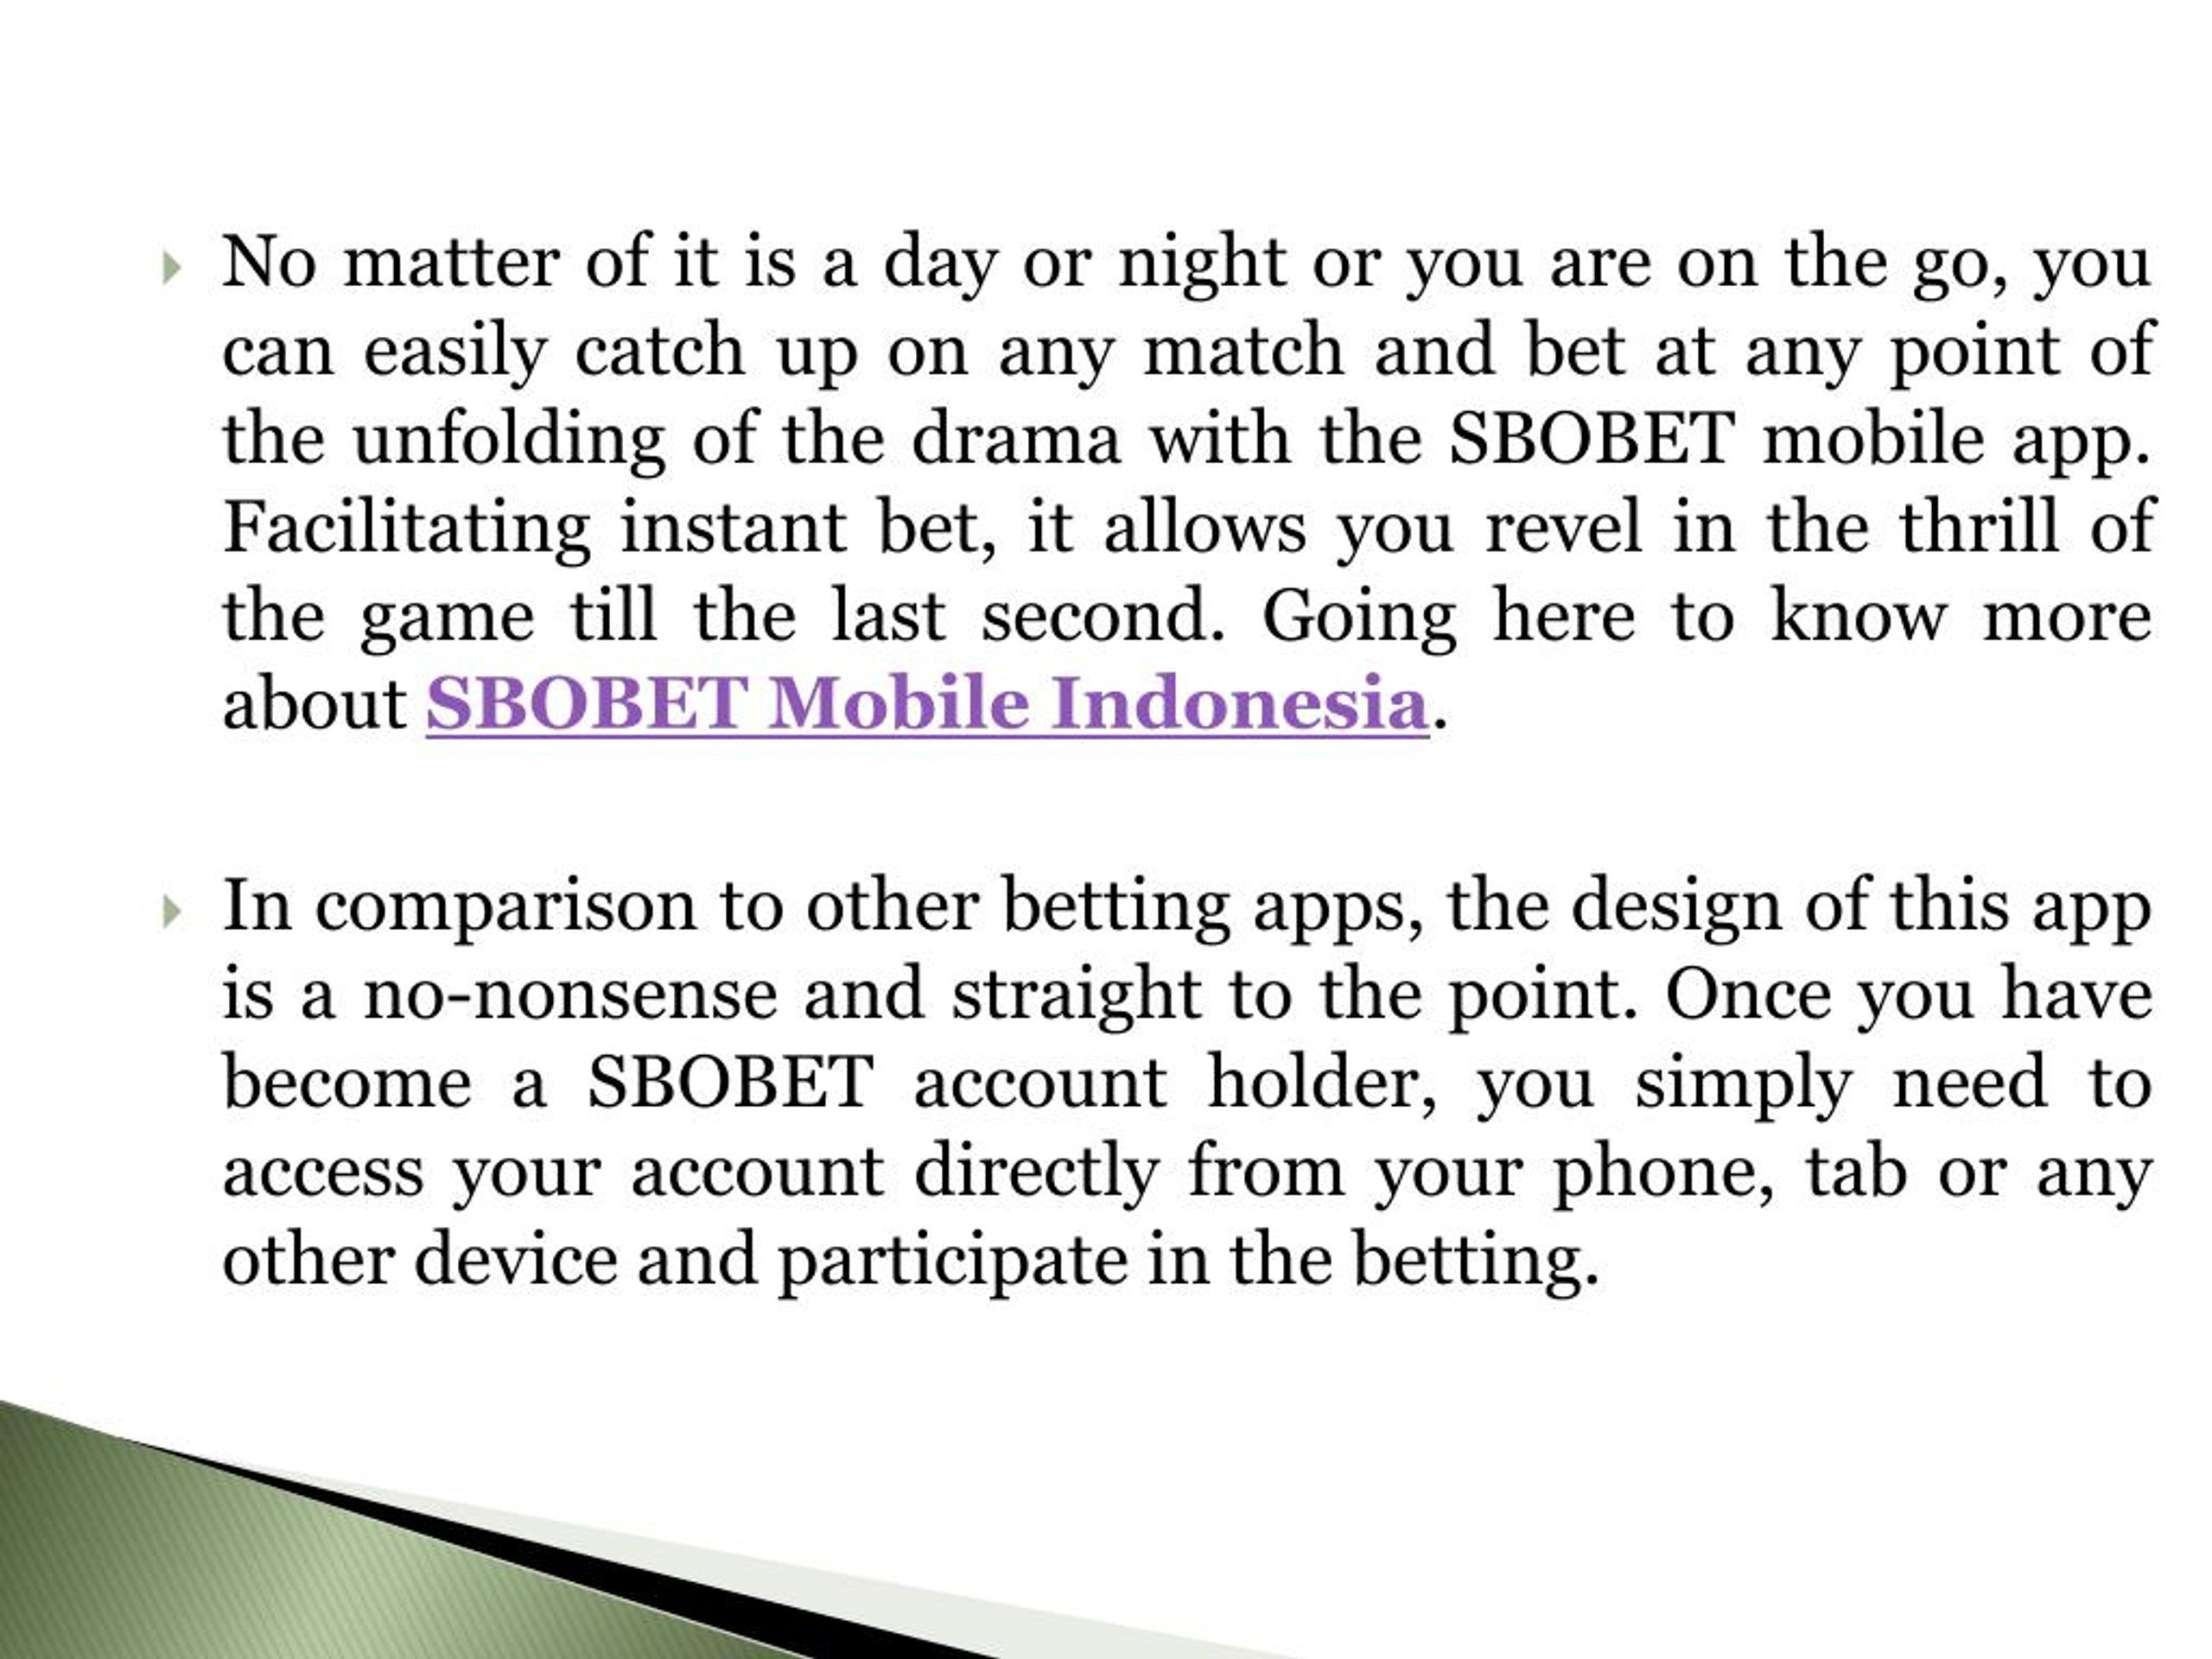 Ppt Sbobet Mobile Indonesia To Gamble And Win On Sports Events Powerpoint Presentation Id 7546579